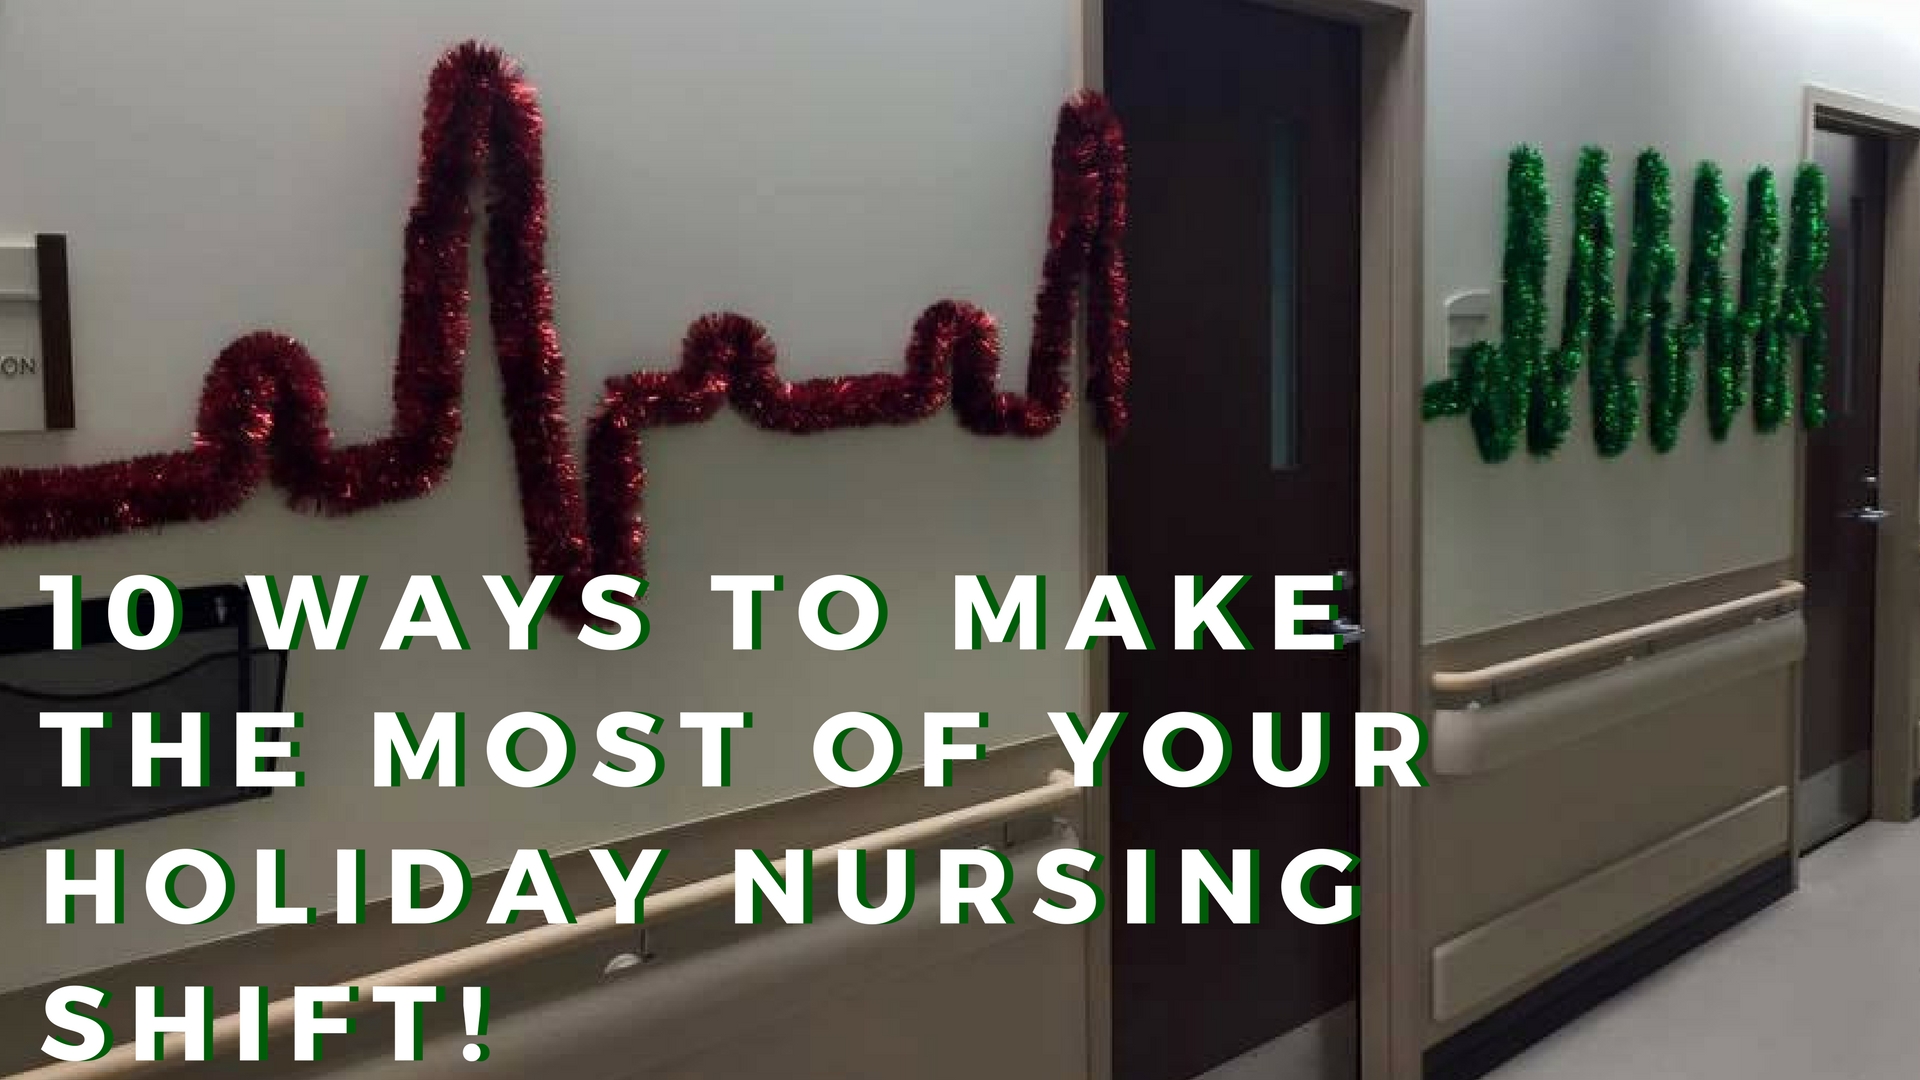 10 Ways to Make the Most of Your Holiday Nursing Shift! - AHS